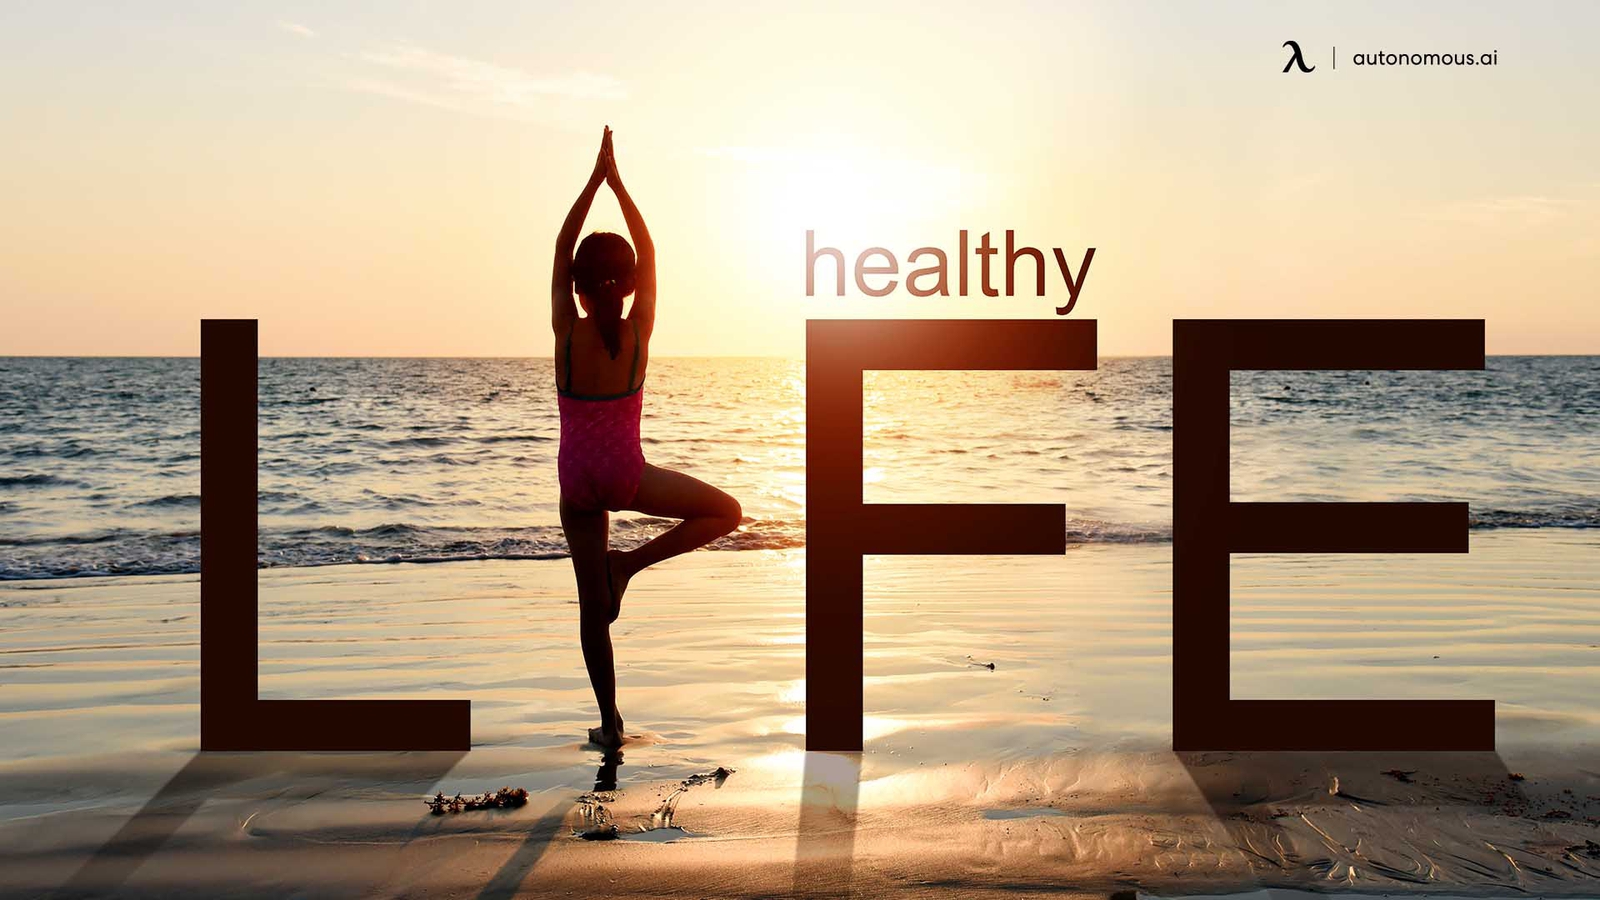 7 Healthy Life Tips to Make Your Life Better